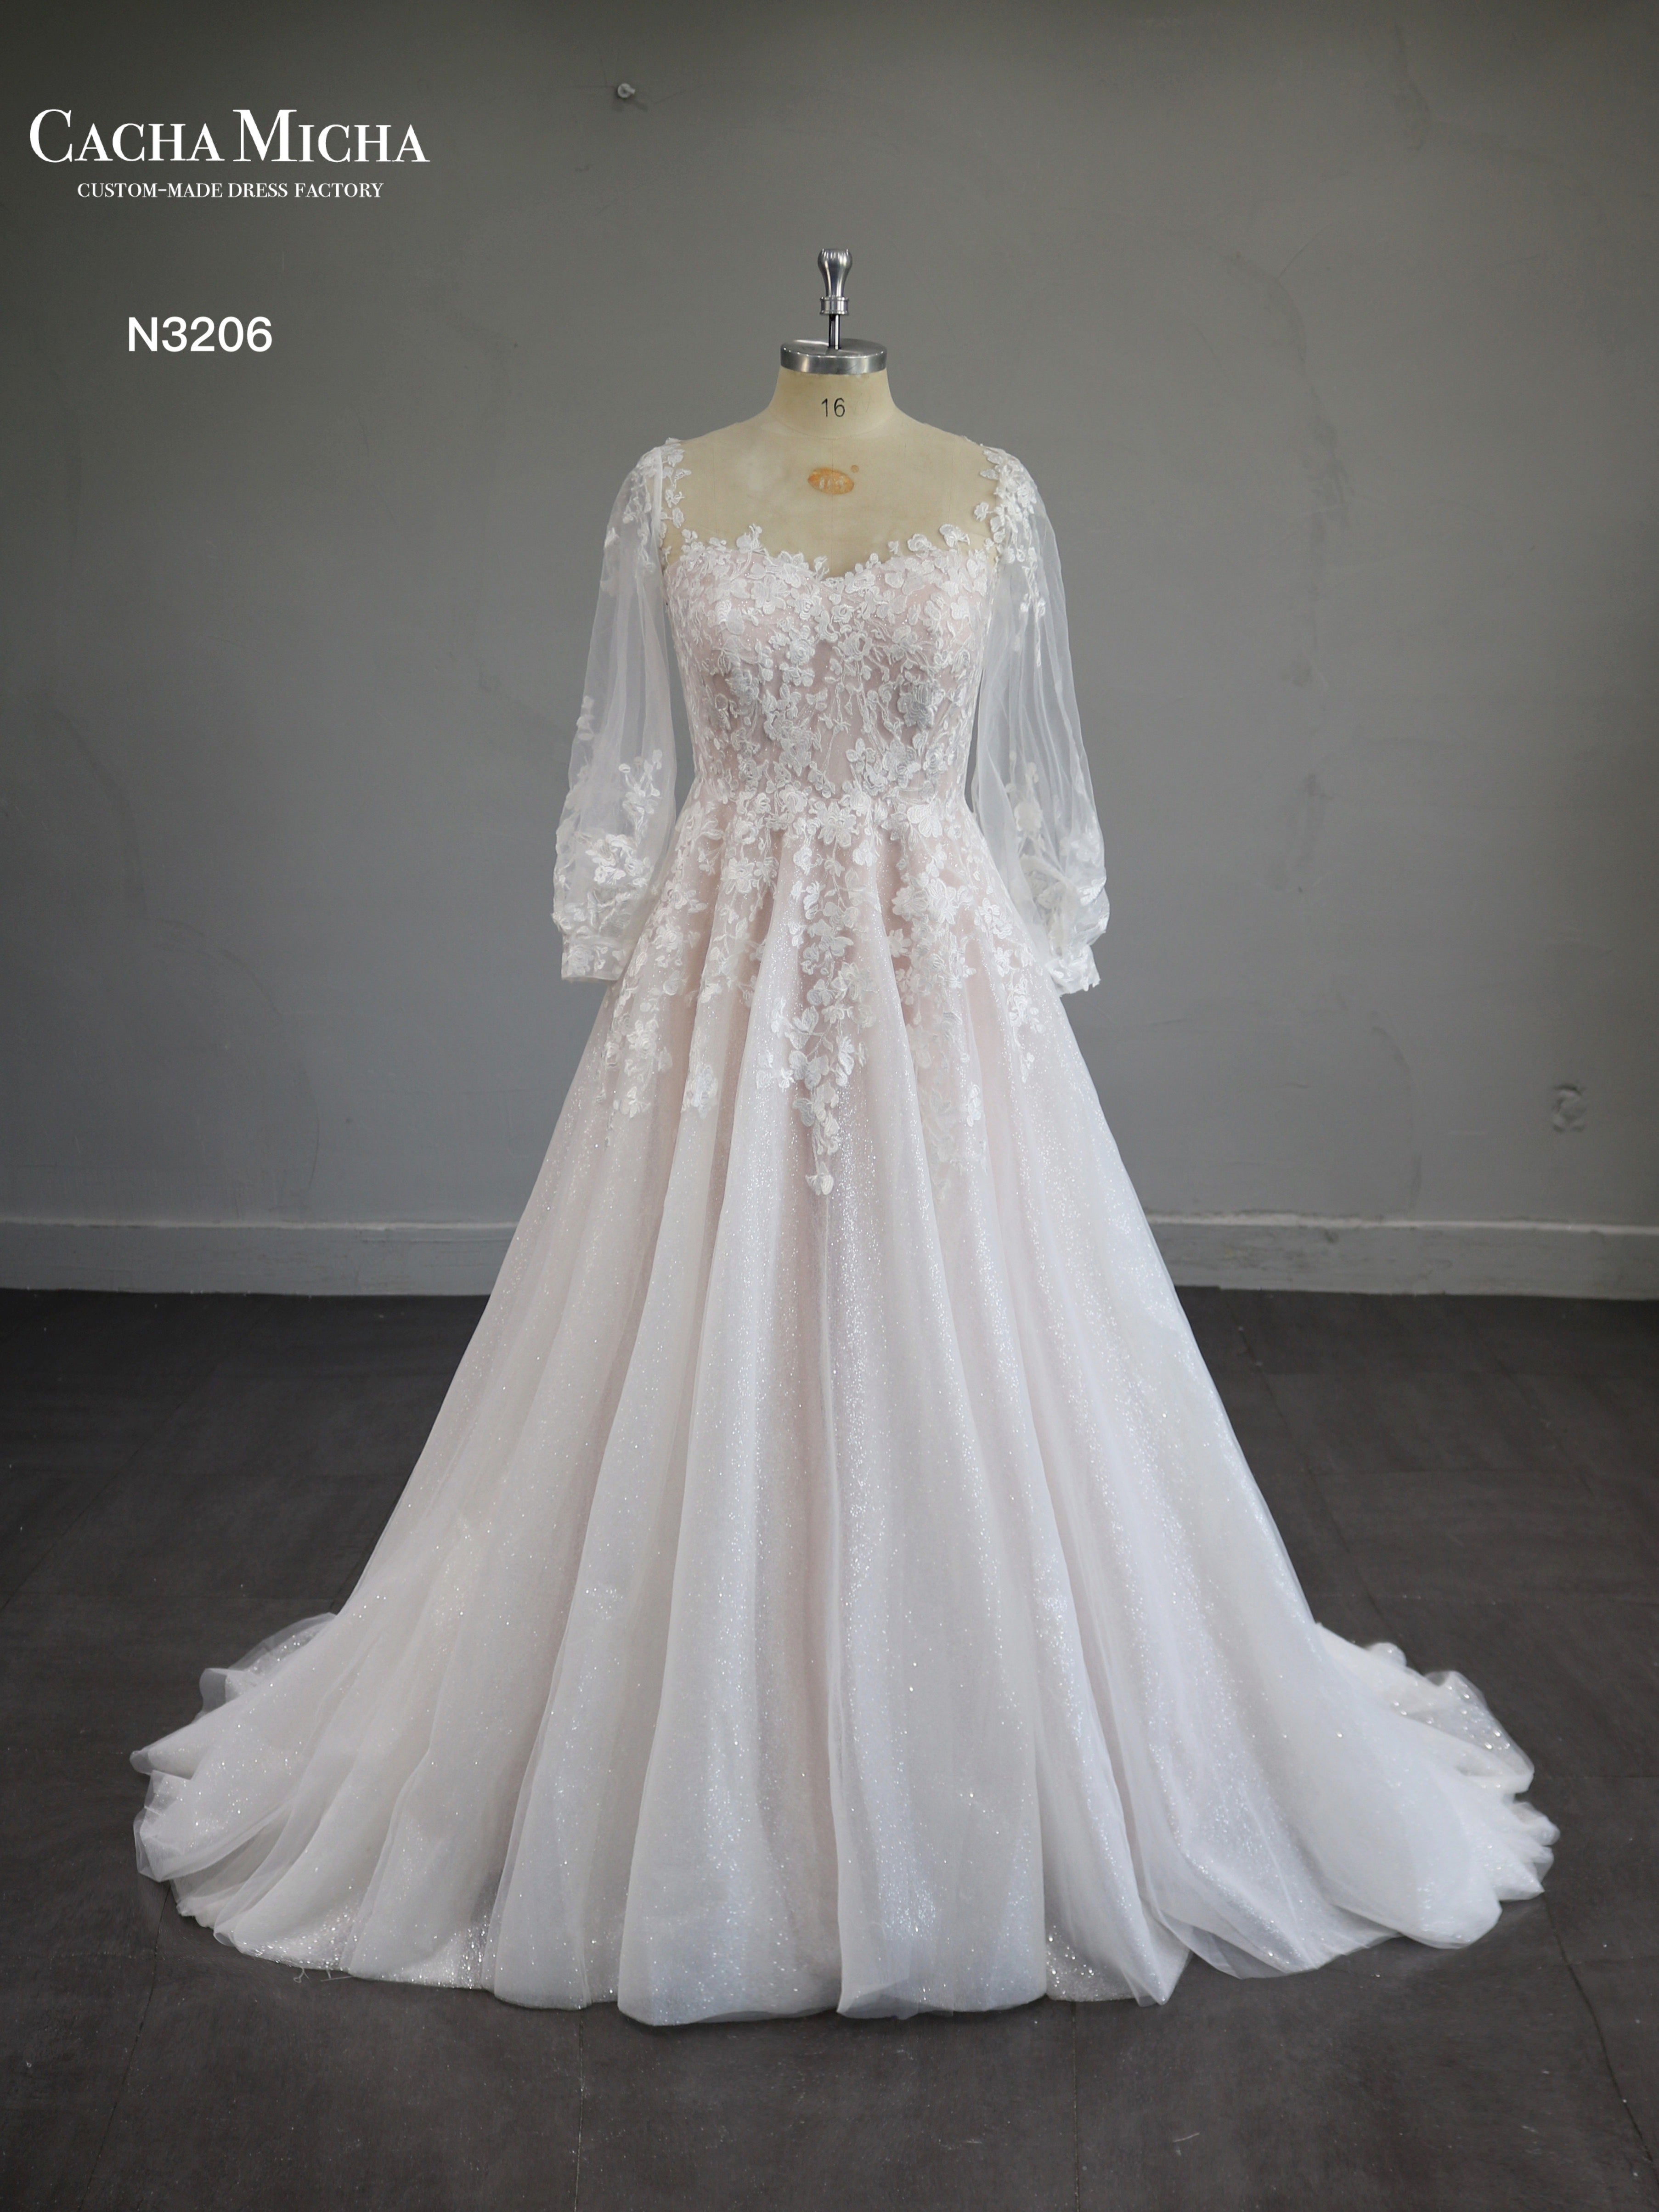 Lace Long Sleeves Blush Lining Wedding Dress With Cape N3206